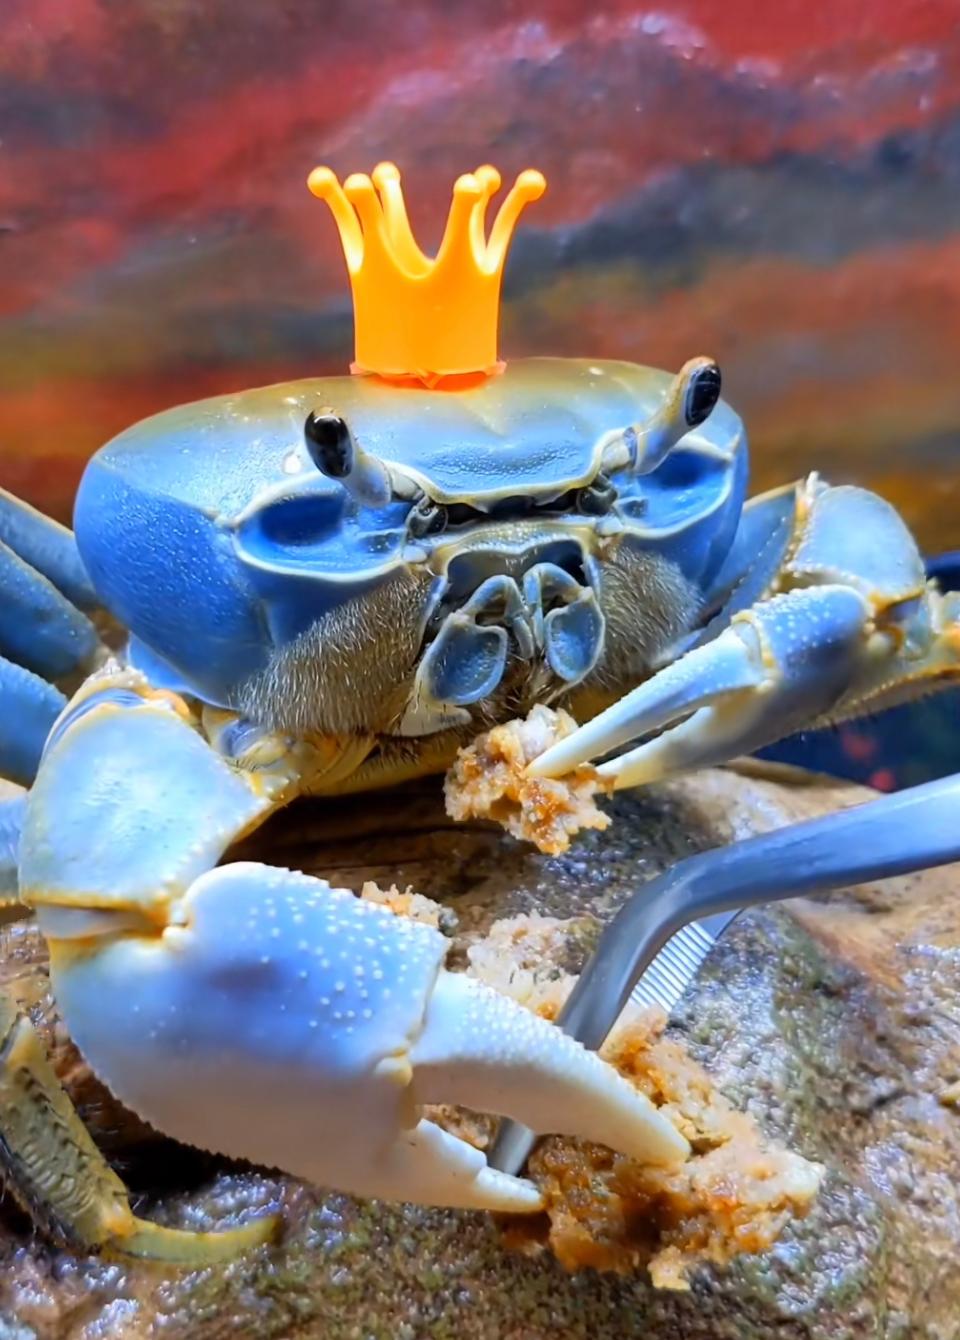 Howie the crab